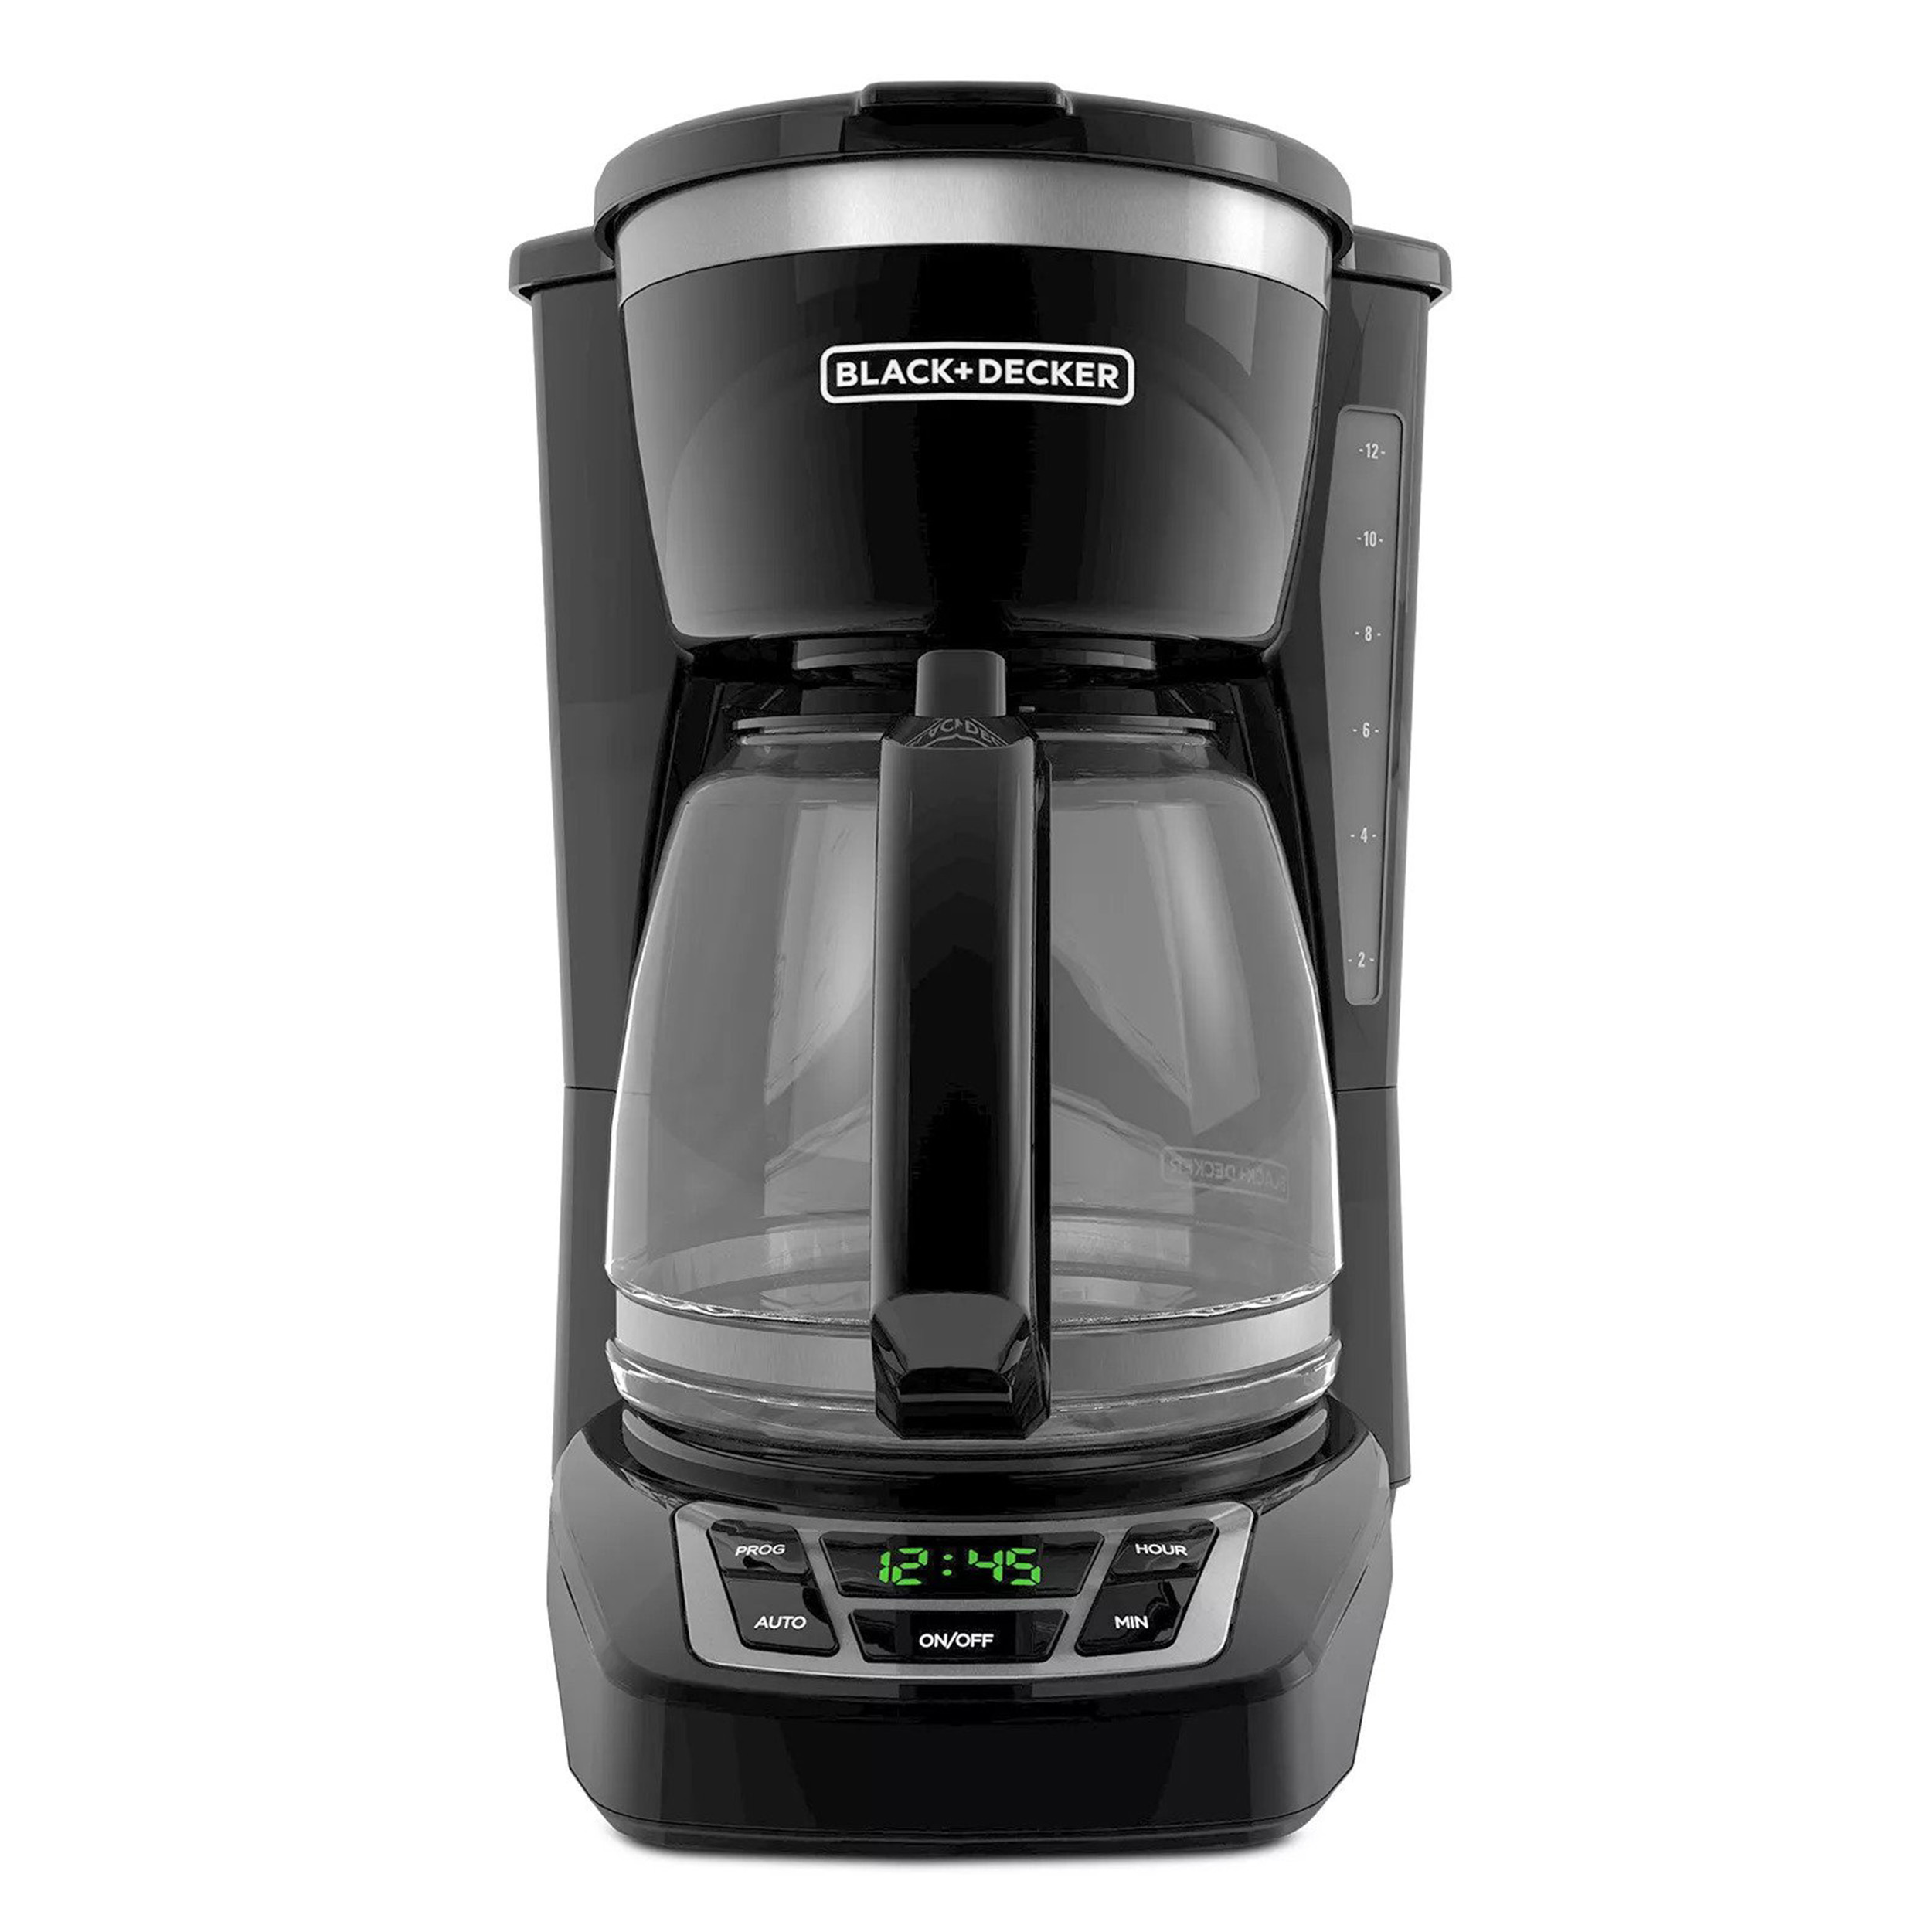 Black and Decker 12 Cup Programmable Coffee Maker